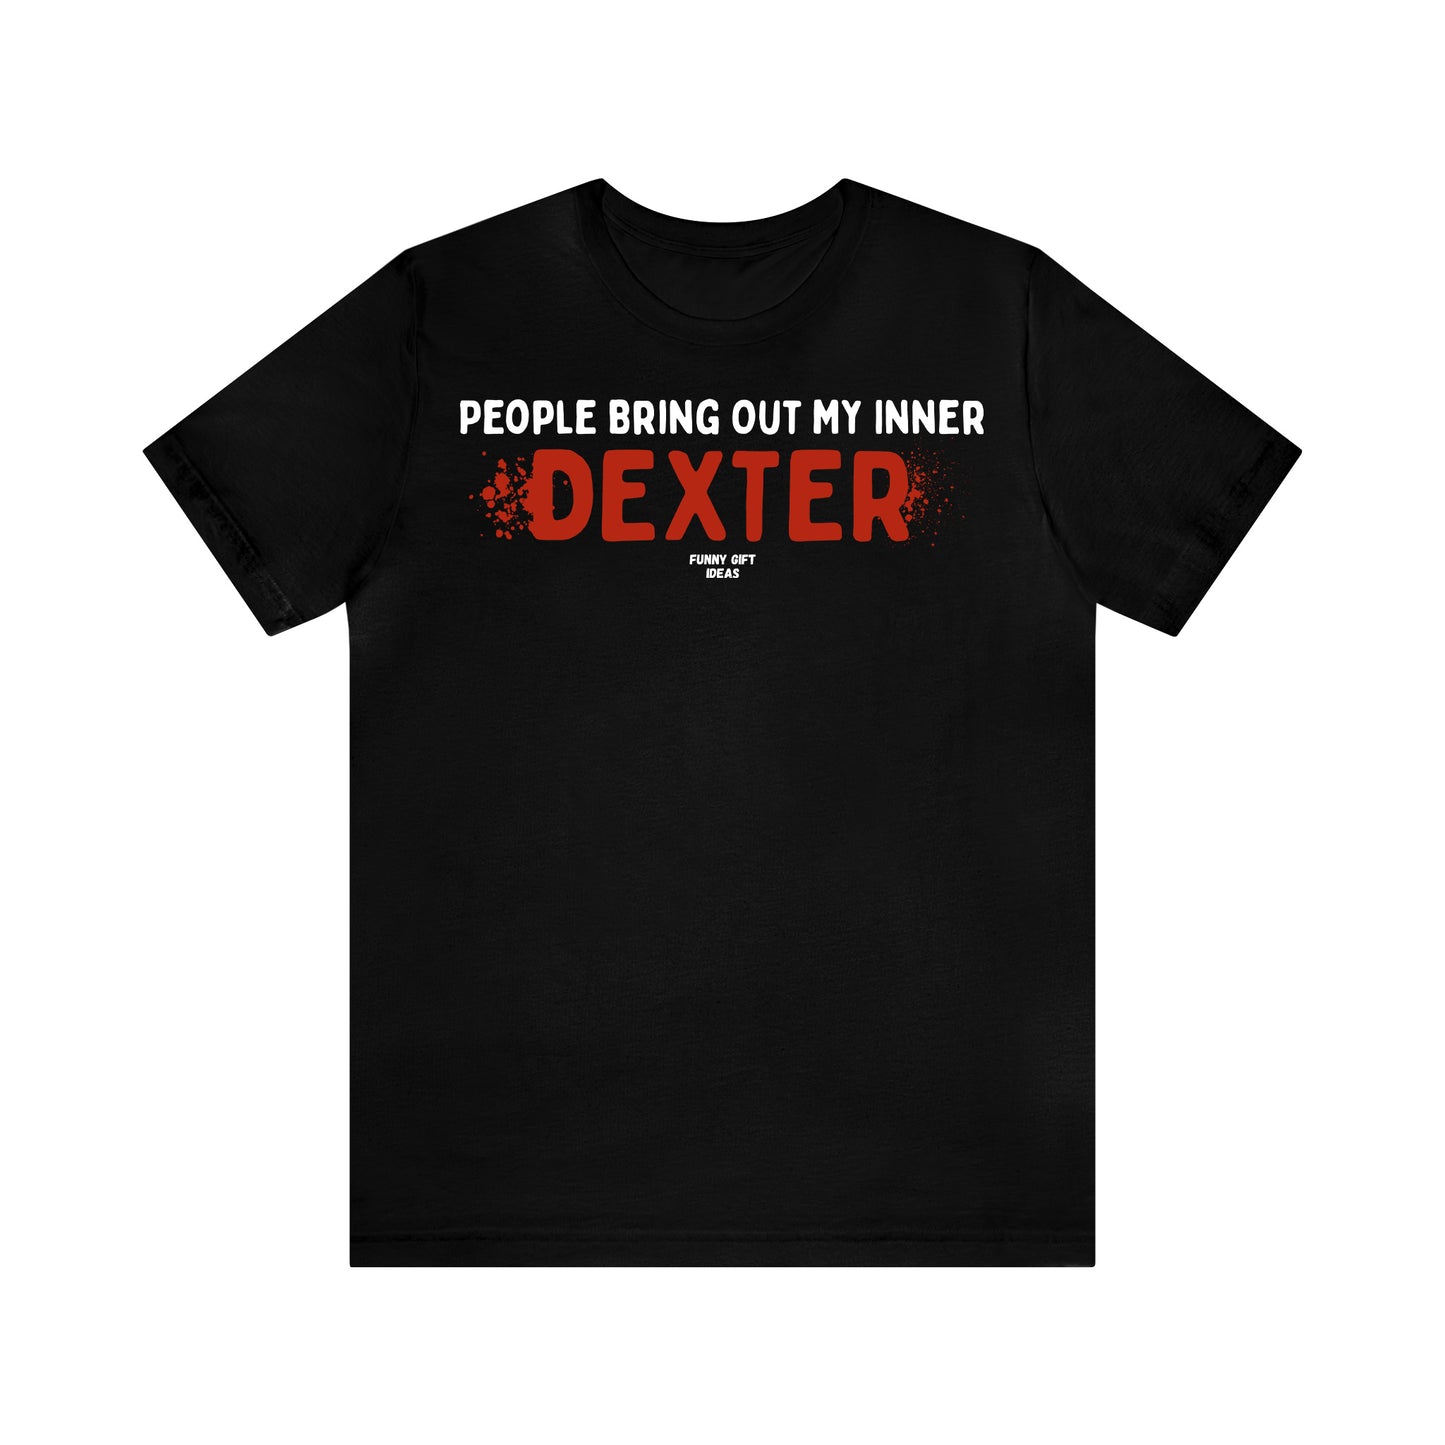 Funny Shirts for Women - People Bring Out My Inner Dexter - Women's T Shirts